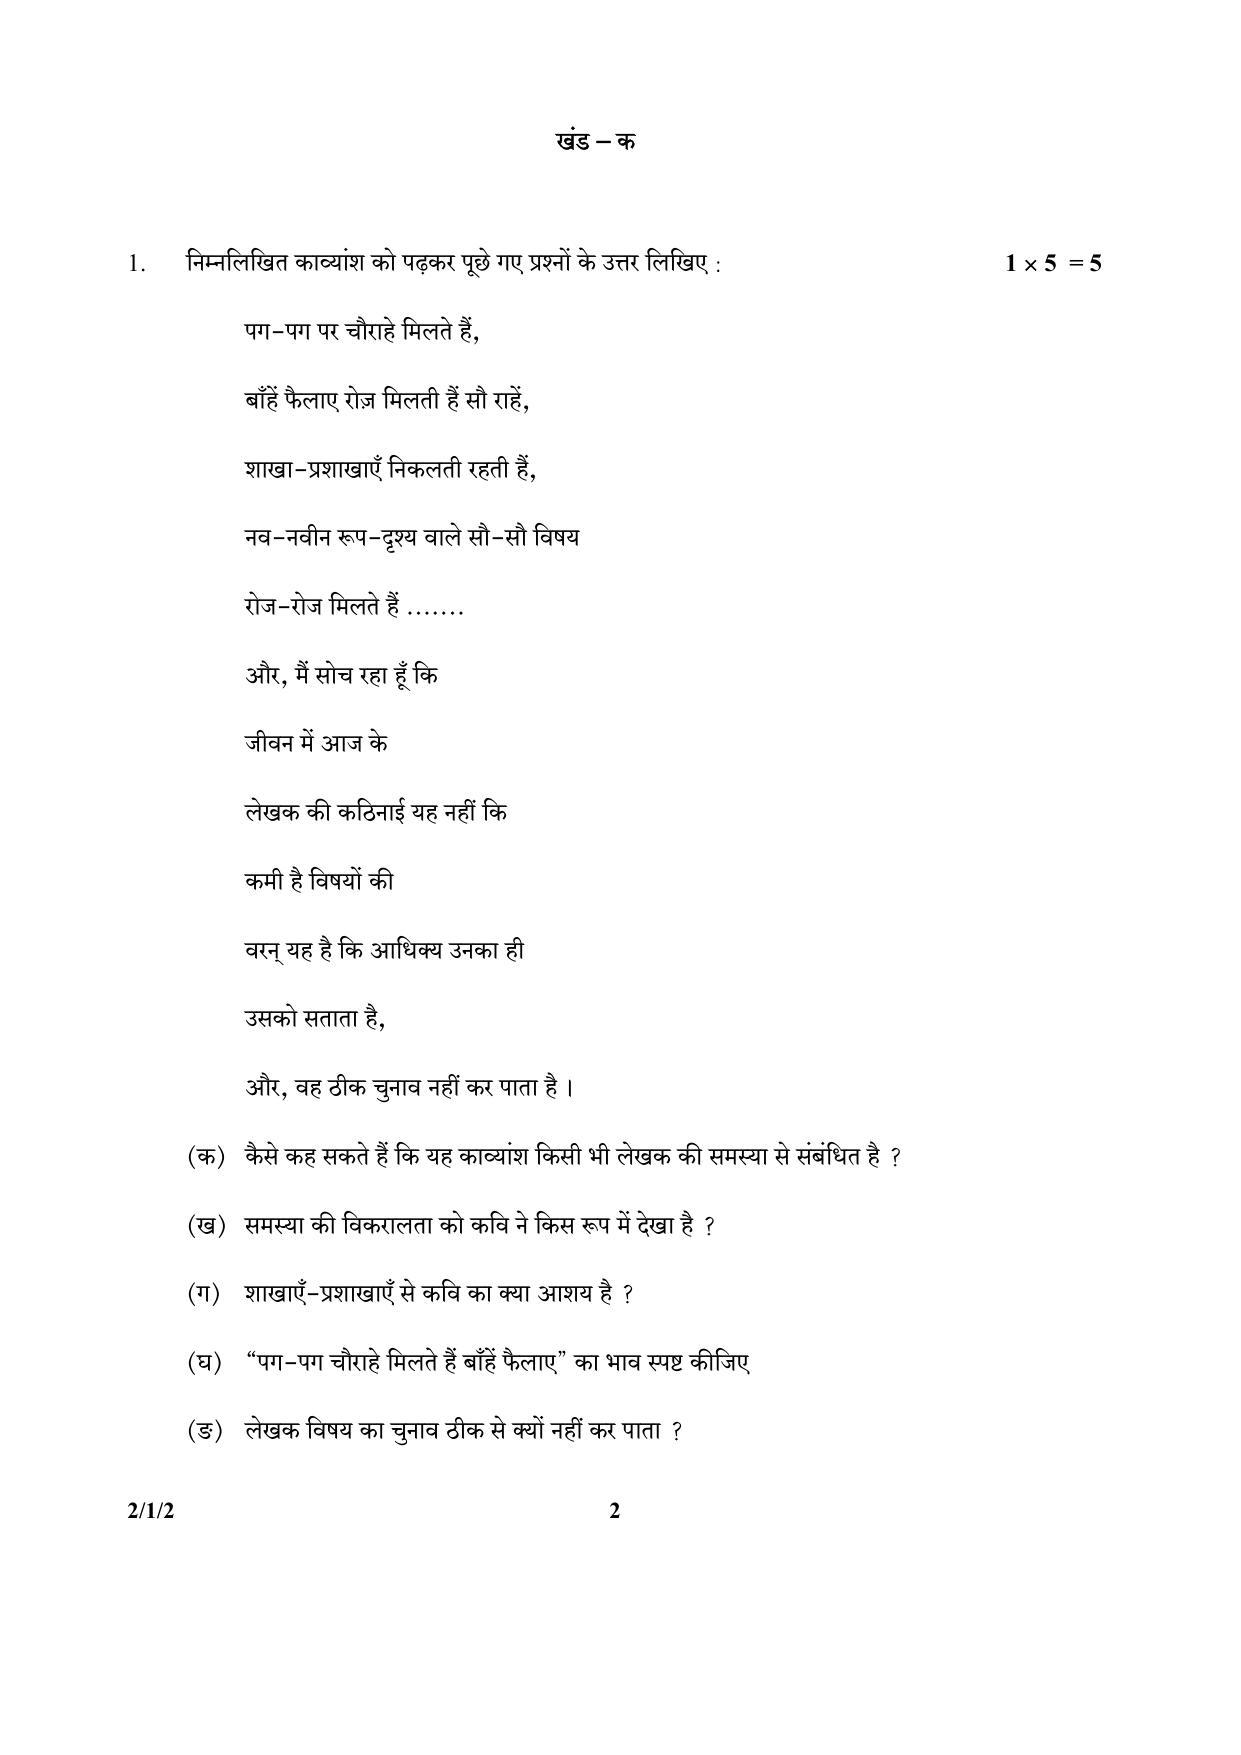 CBSE Class 12 2-1-2 (Hindi) 2017-comptt Question Paper - Page 2